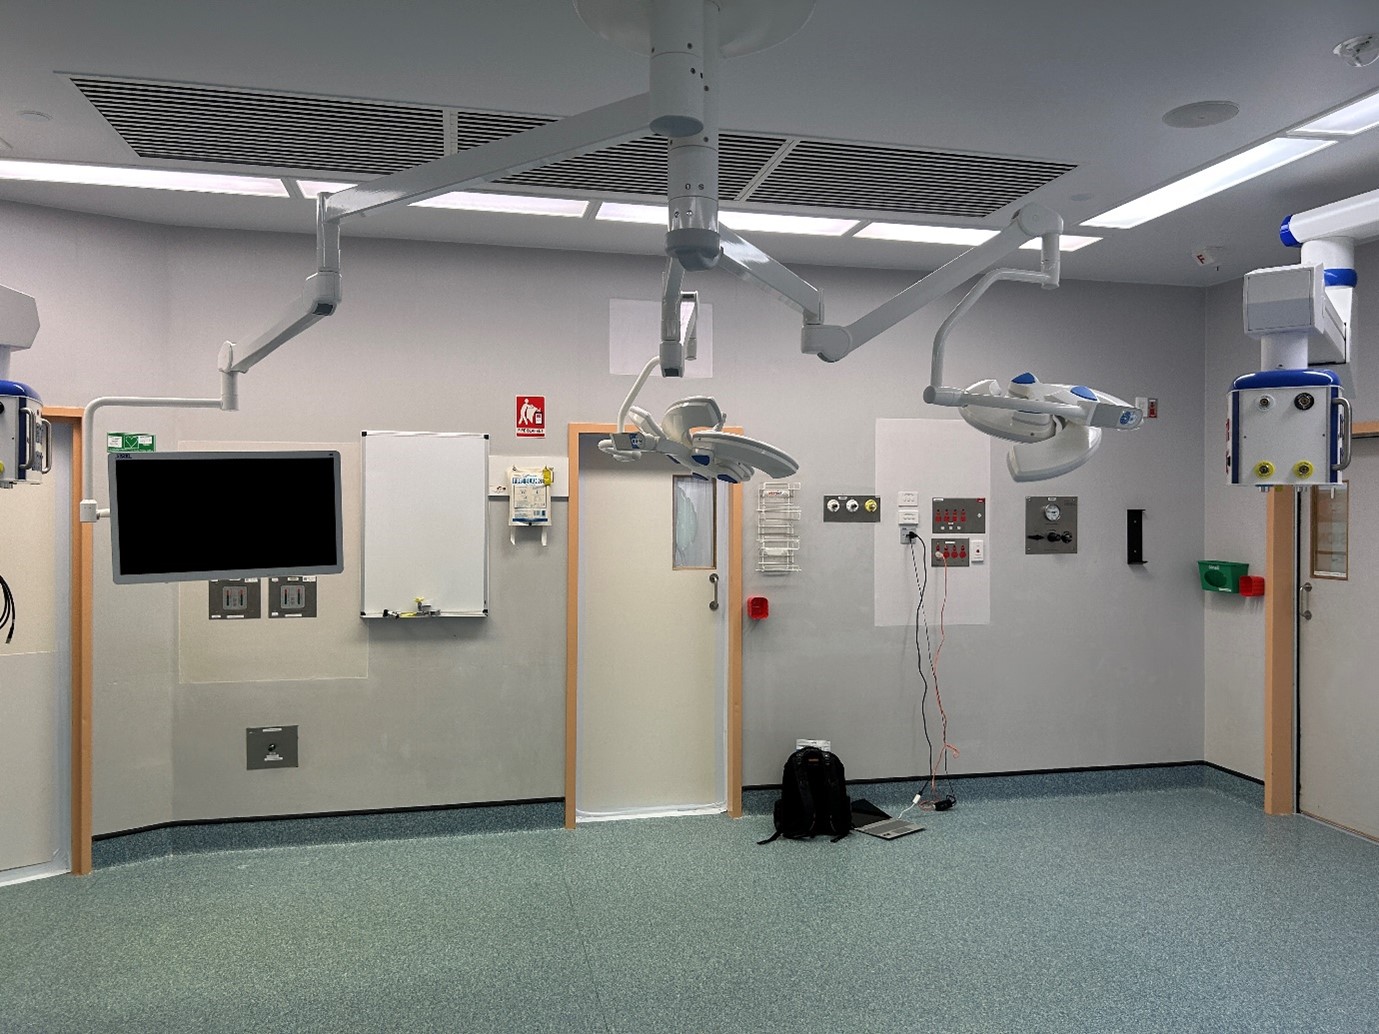 Operating Theatre Pendant lights and control panels